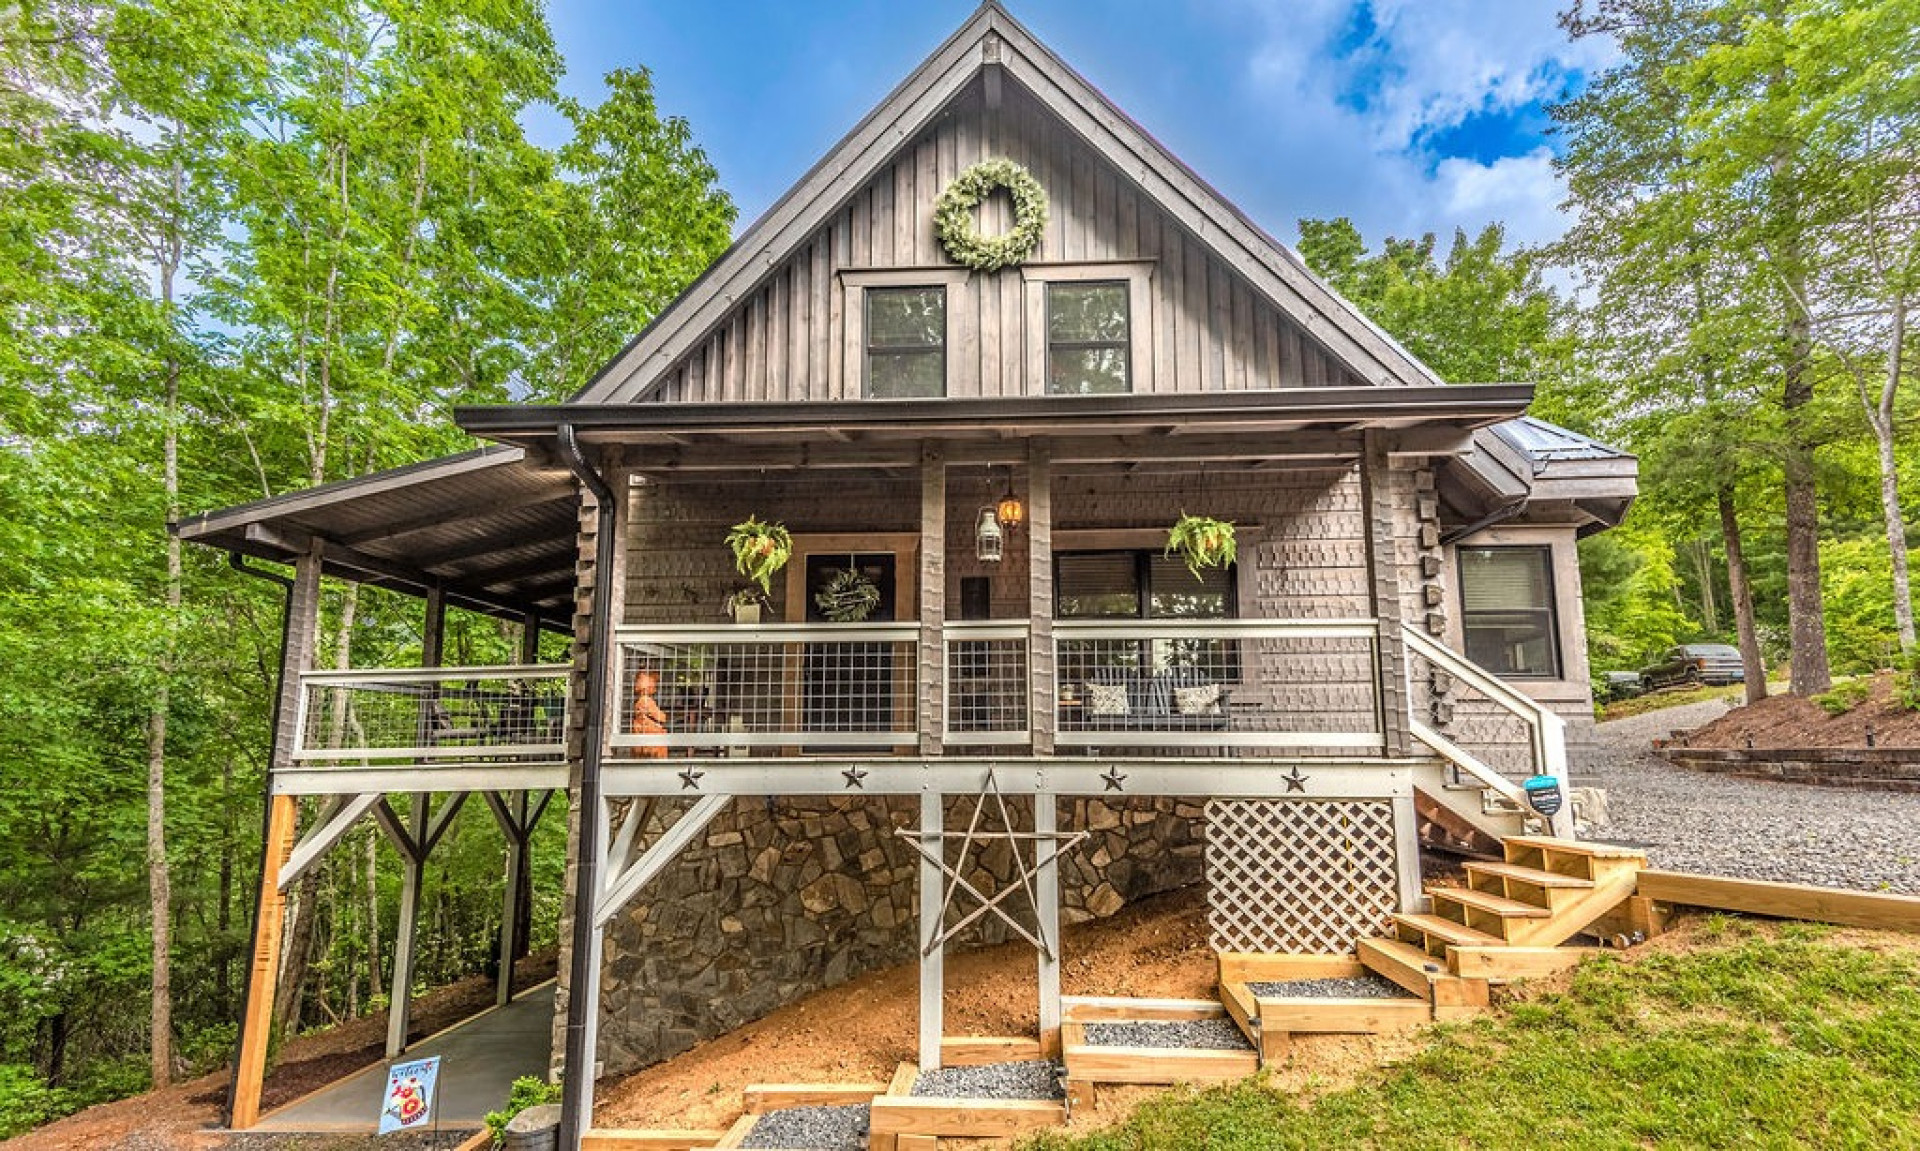 Charming log cabin perfectly situated in a peaceful wooded setting in Christmas Mountain.